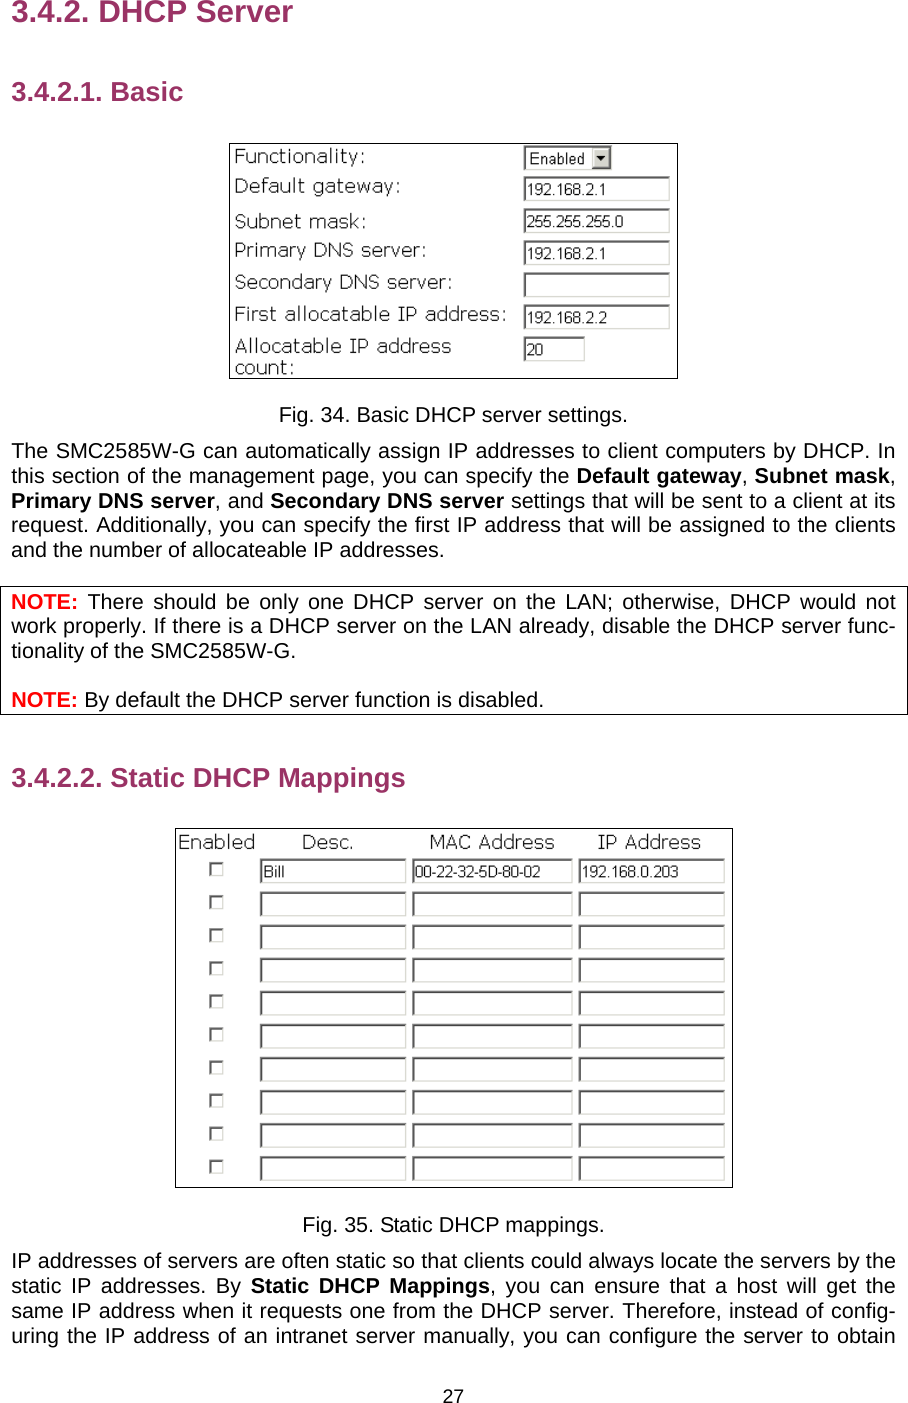   273.4.2. DHCP Server 3.4.2.1. Basic  Fig. 34. Basic DHCP server settings. The SMC2585W-G can automatically assign IP addresses to client computers by DHCP. In this section of the management page, you can specify the Default gateway, Subnet mask, Primary DNS server, and Secondary DNS server settings that will be sent to a client at its request. Additionally, you can specify the first IP address that will be assigned to the clients and the number of allocateable IP addresses. NOTE: There should be only one DHCP server on the LAN; otherwise, DHCP would not work properly. If there is a DHCP server on the LAN already, disable the DHCP server func-tionality of the SMC2585W-G. NOTE: By default the DHCP server function is disabled. 3.4.2.2. Static DHCP Mappings  Fig. 35. Static DHCP mappings. IP addresses of servers are often static so that clients could always locate the servers by the static IP addresses. By Static DHCP Mappings, you can ensure that a host will get the same IP address when it requests one from the DHCP server. Therefore, instead of config-uring the IP address of an intranet server manually, you can configure the server to obtain 